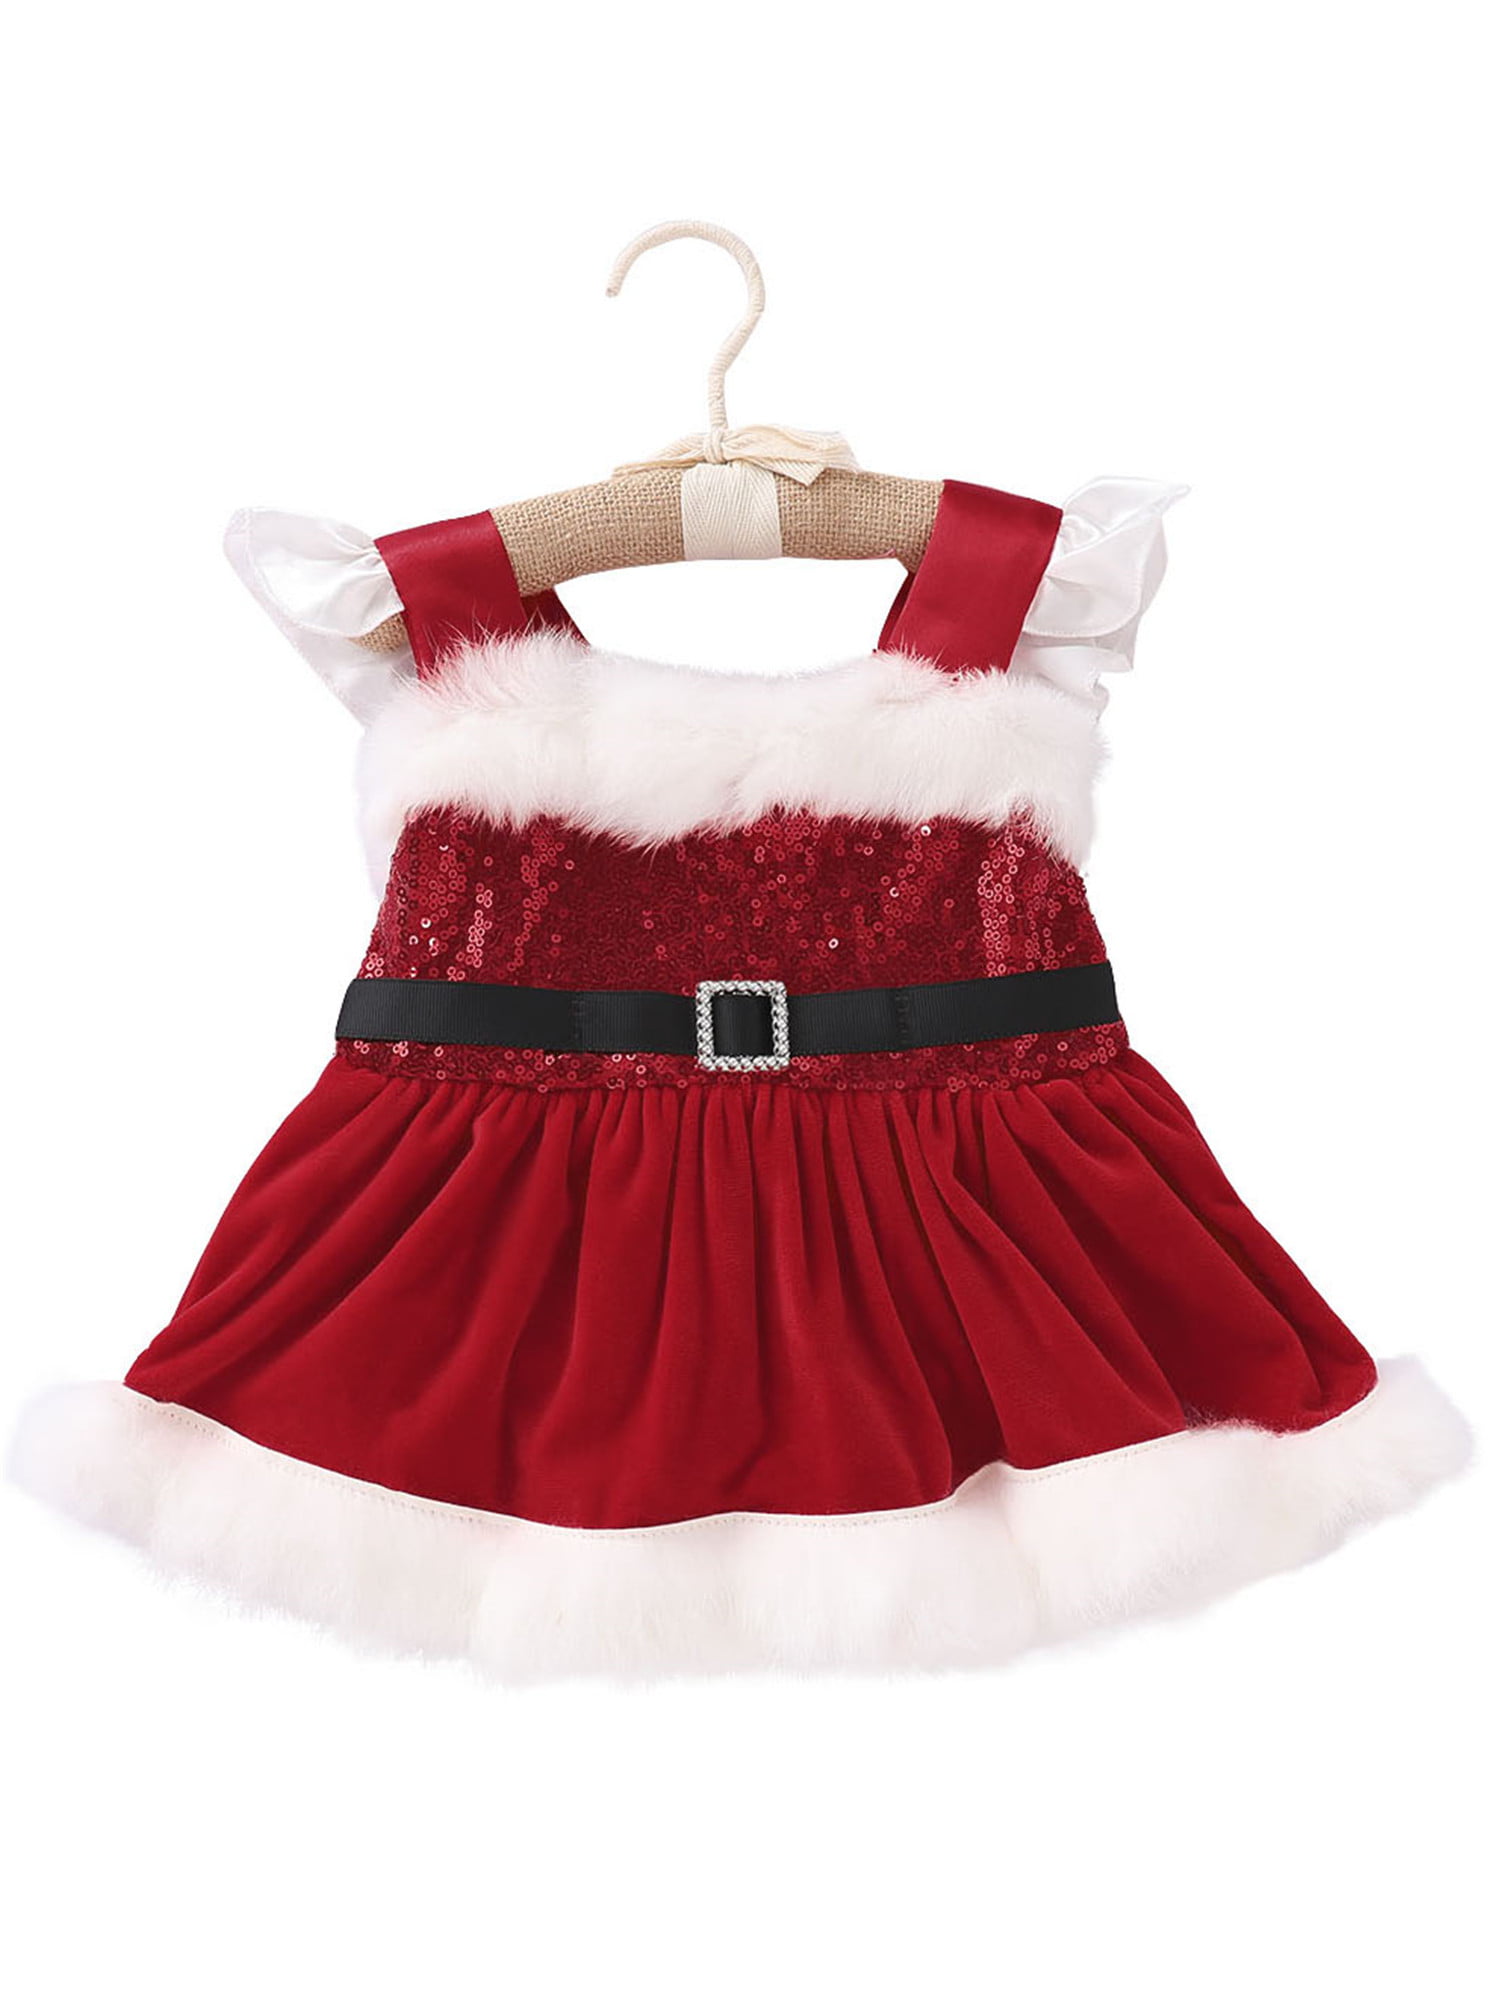 My First Christmas Santa Infant Baby Girl Romper Sequined Tutu Dress Newest Sets 